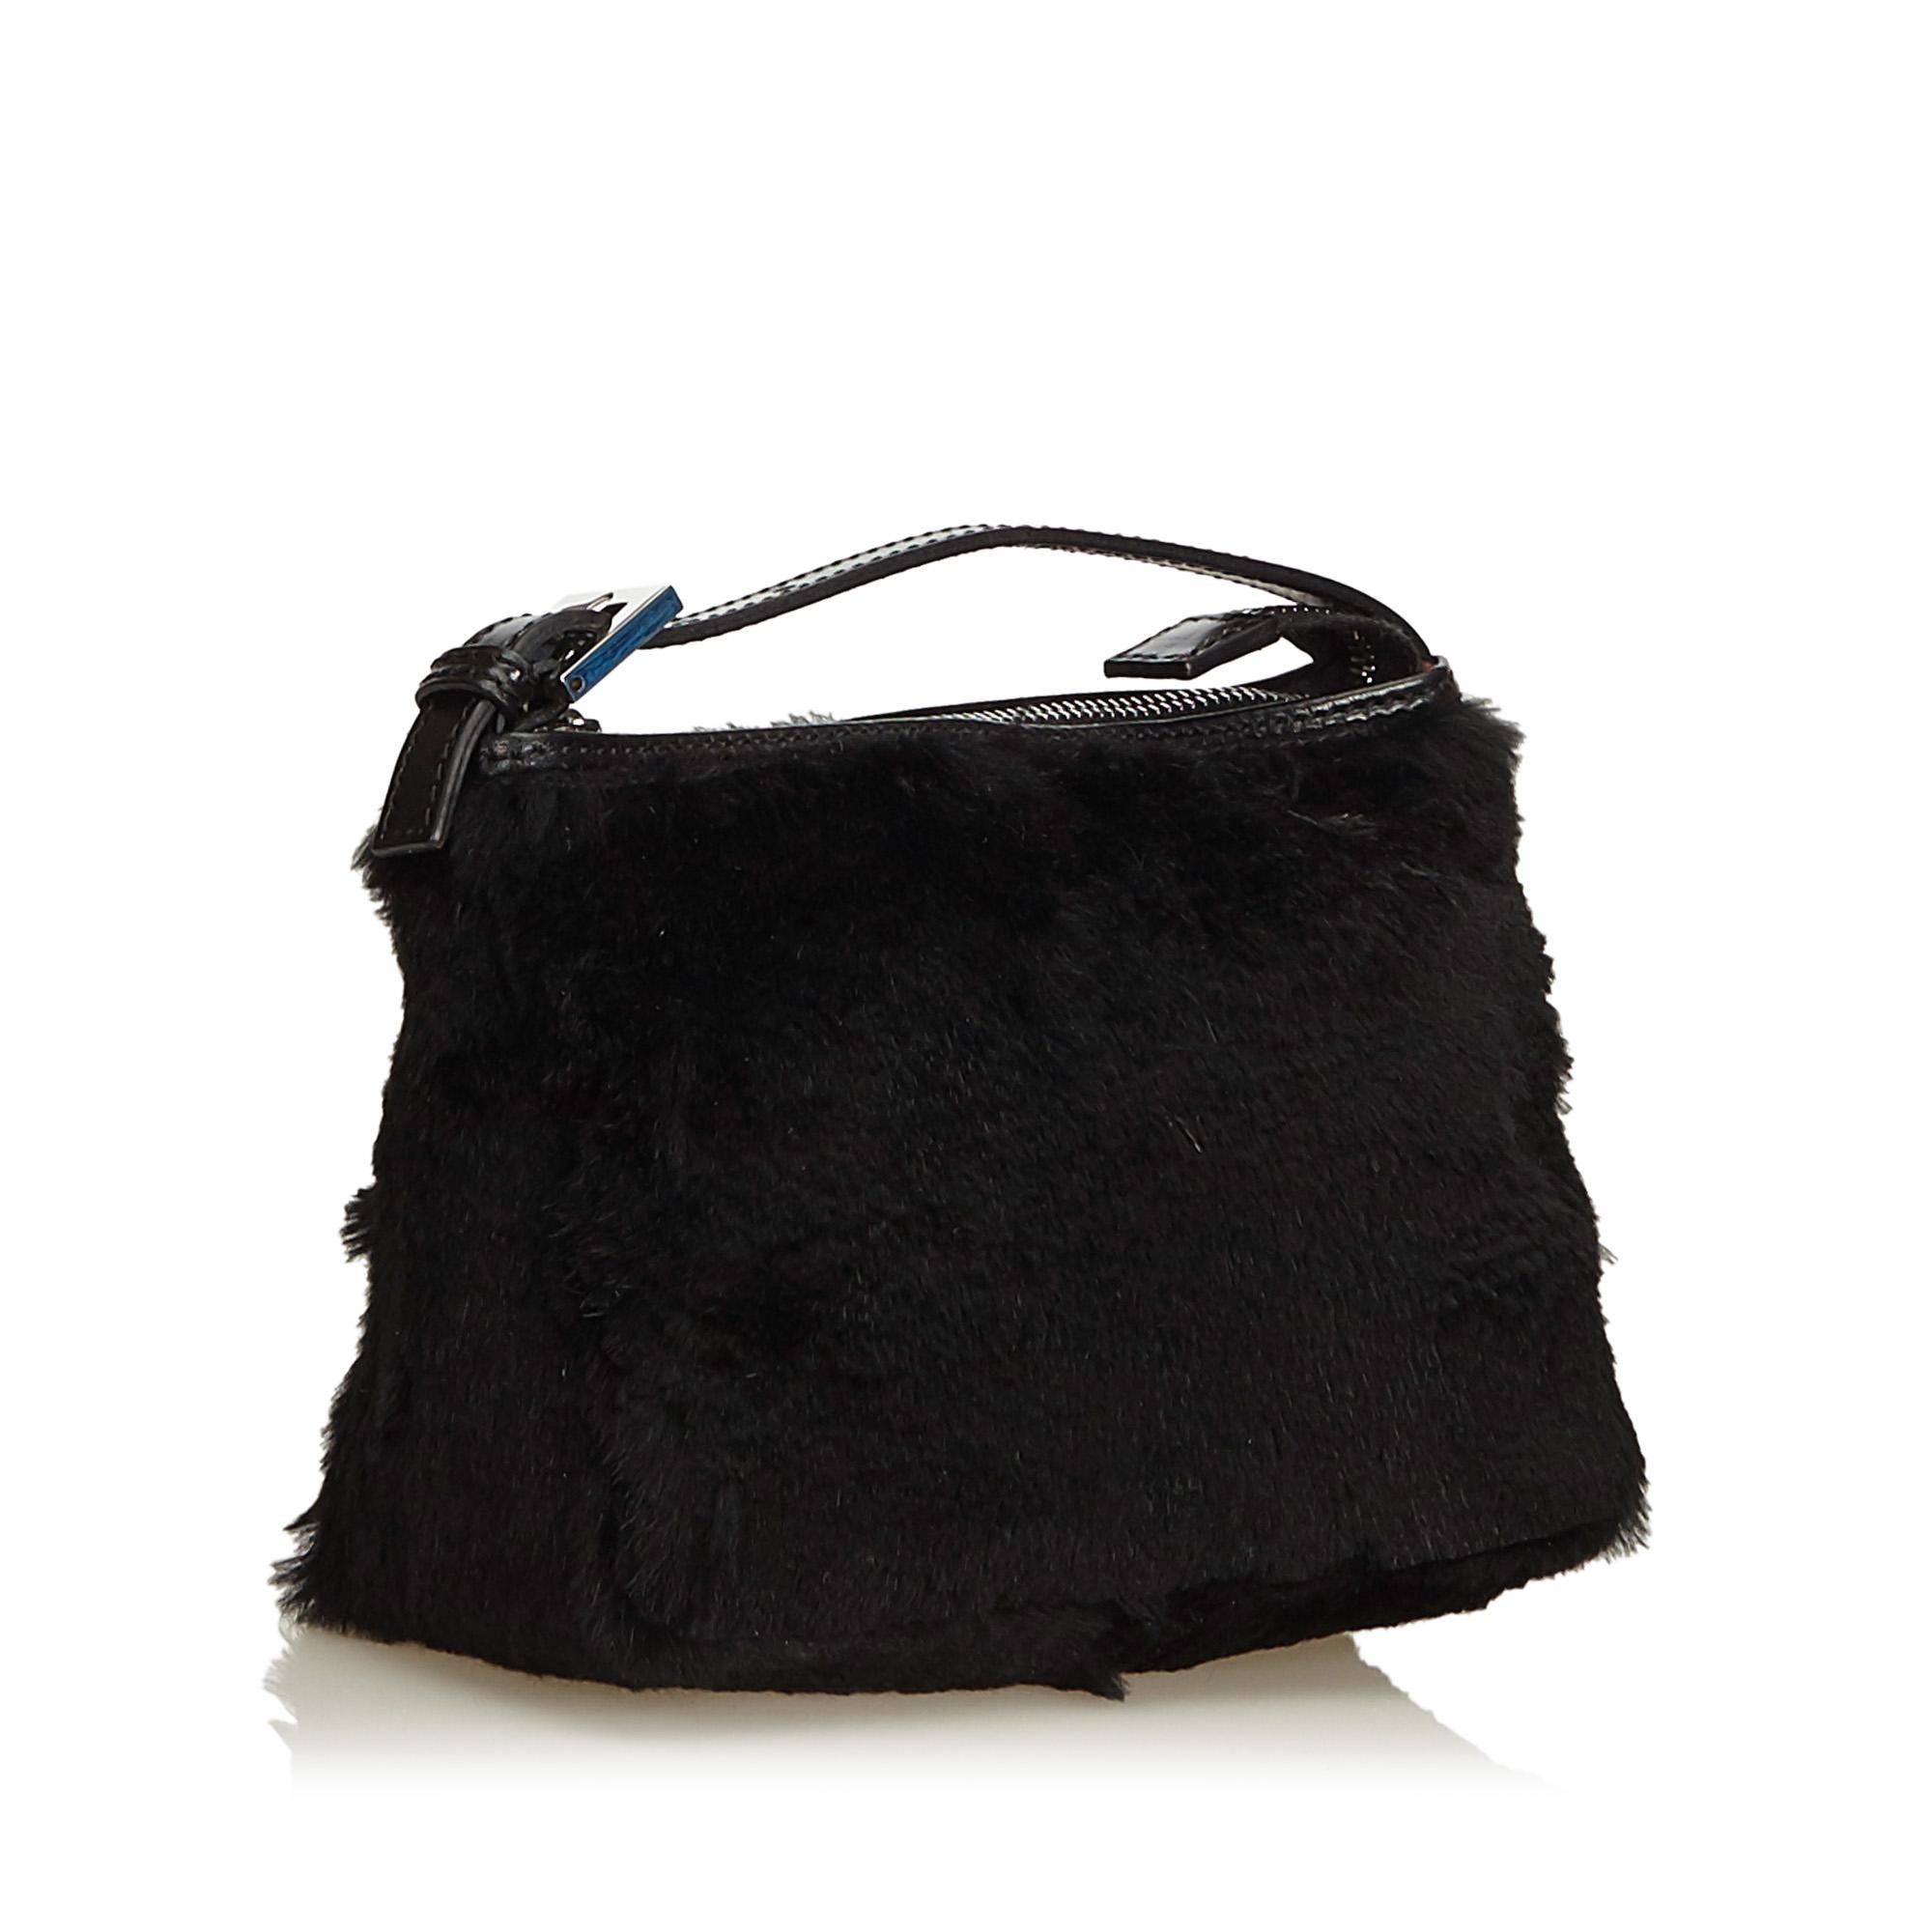 This handbag features a fur body, a flat leather strap, and a top zip closure. It carries as AB condition rating.

Inclusions: 
Dust Bag

Dimensions:
Length: 16.00 cm
Width: 19.00 cm
Depth: 4.00 cm
Hand Drop: 3.00 cm

Material: Natural Material x